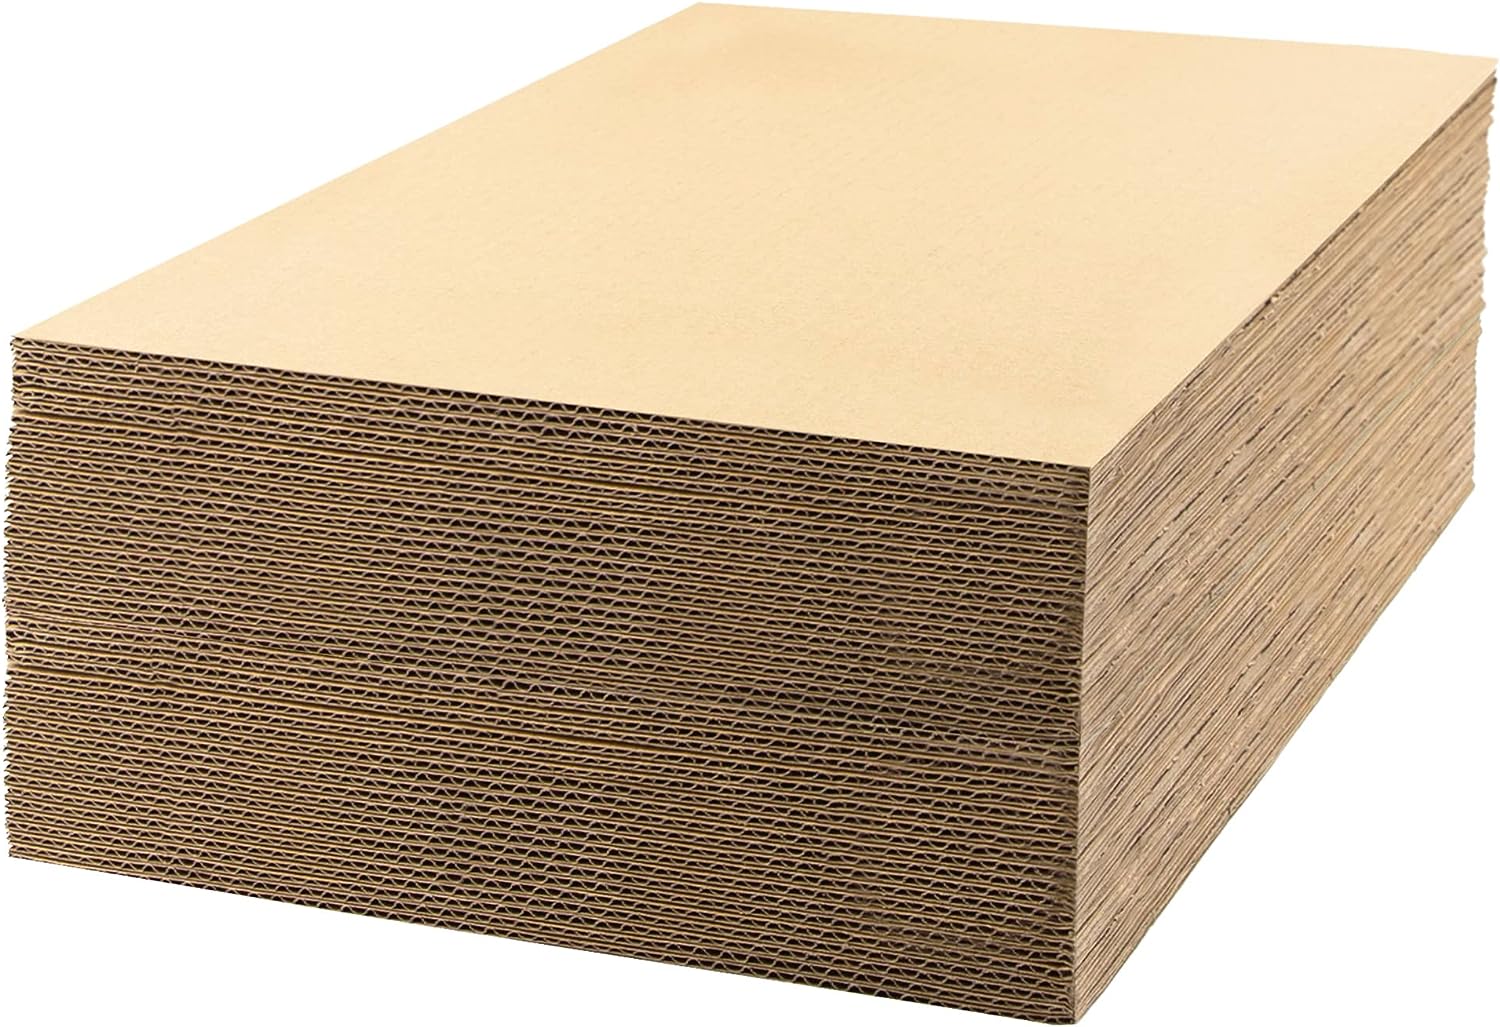 50 Pack Corrugated Cardboard Sheets 6x9, Flat Packaging Inserts for Packing,  Shipping, Mailing (2mm Thick) 